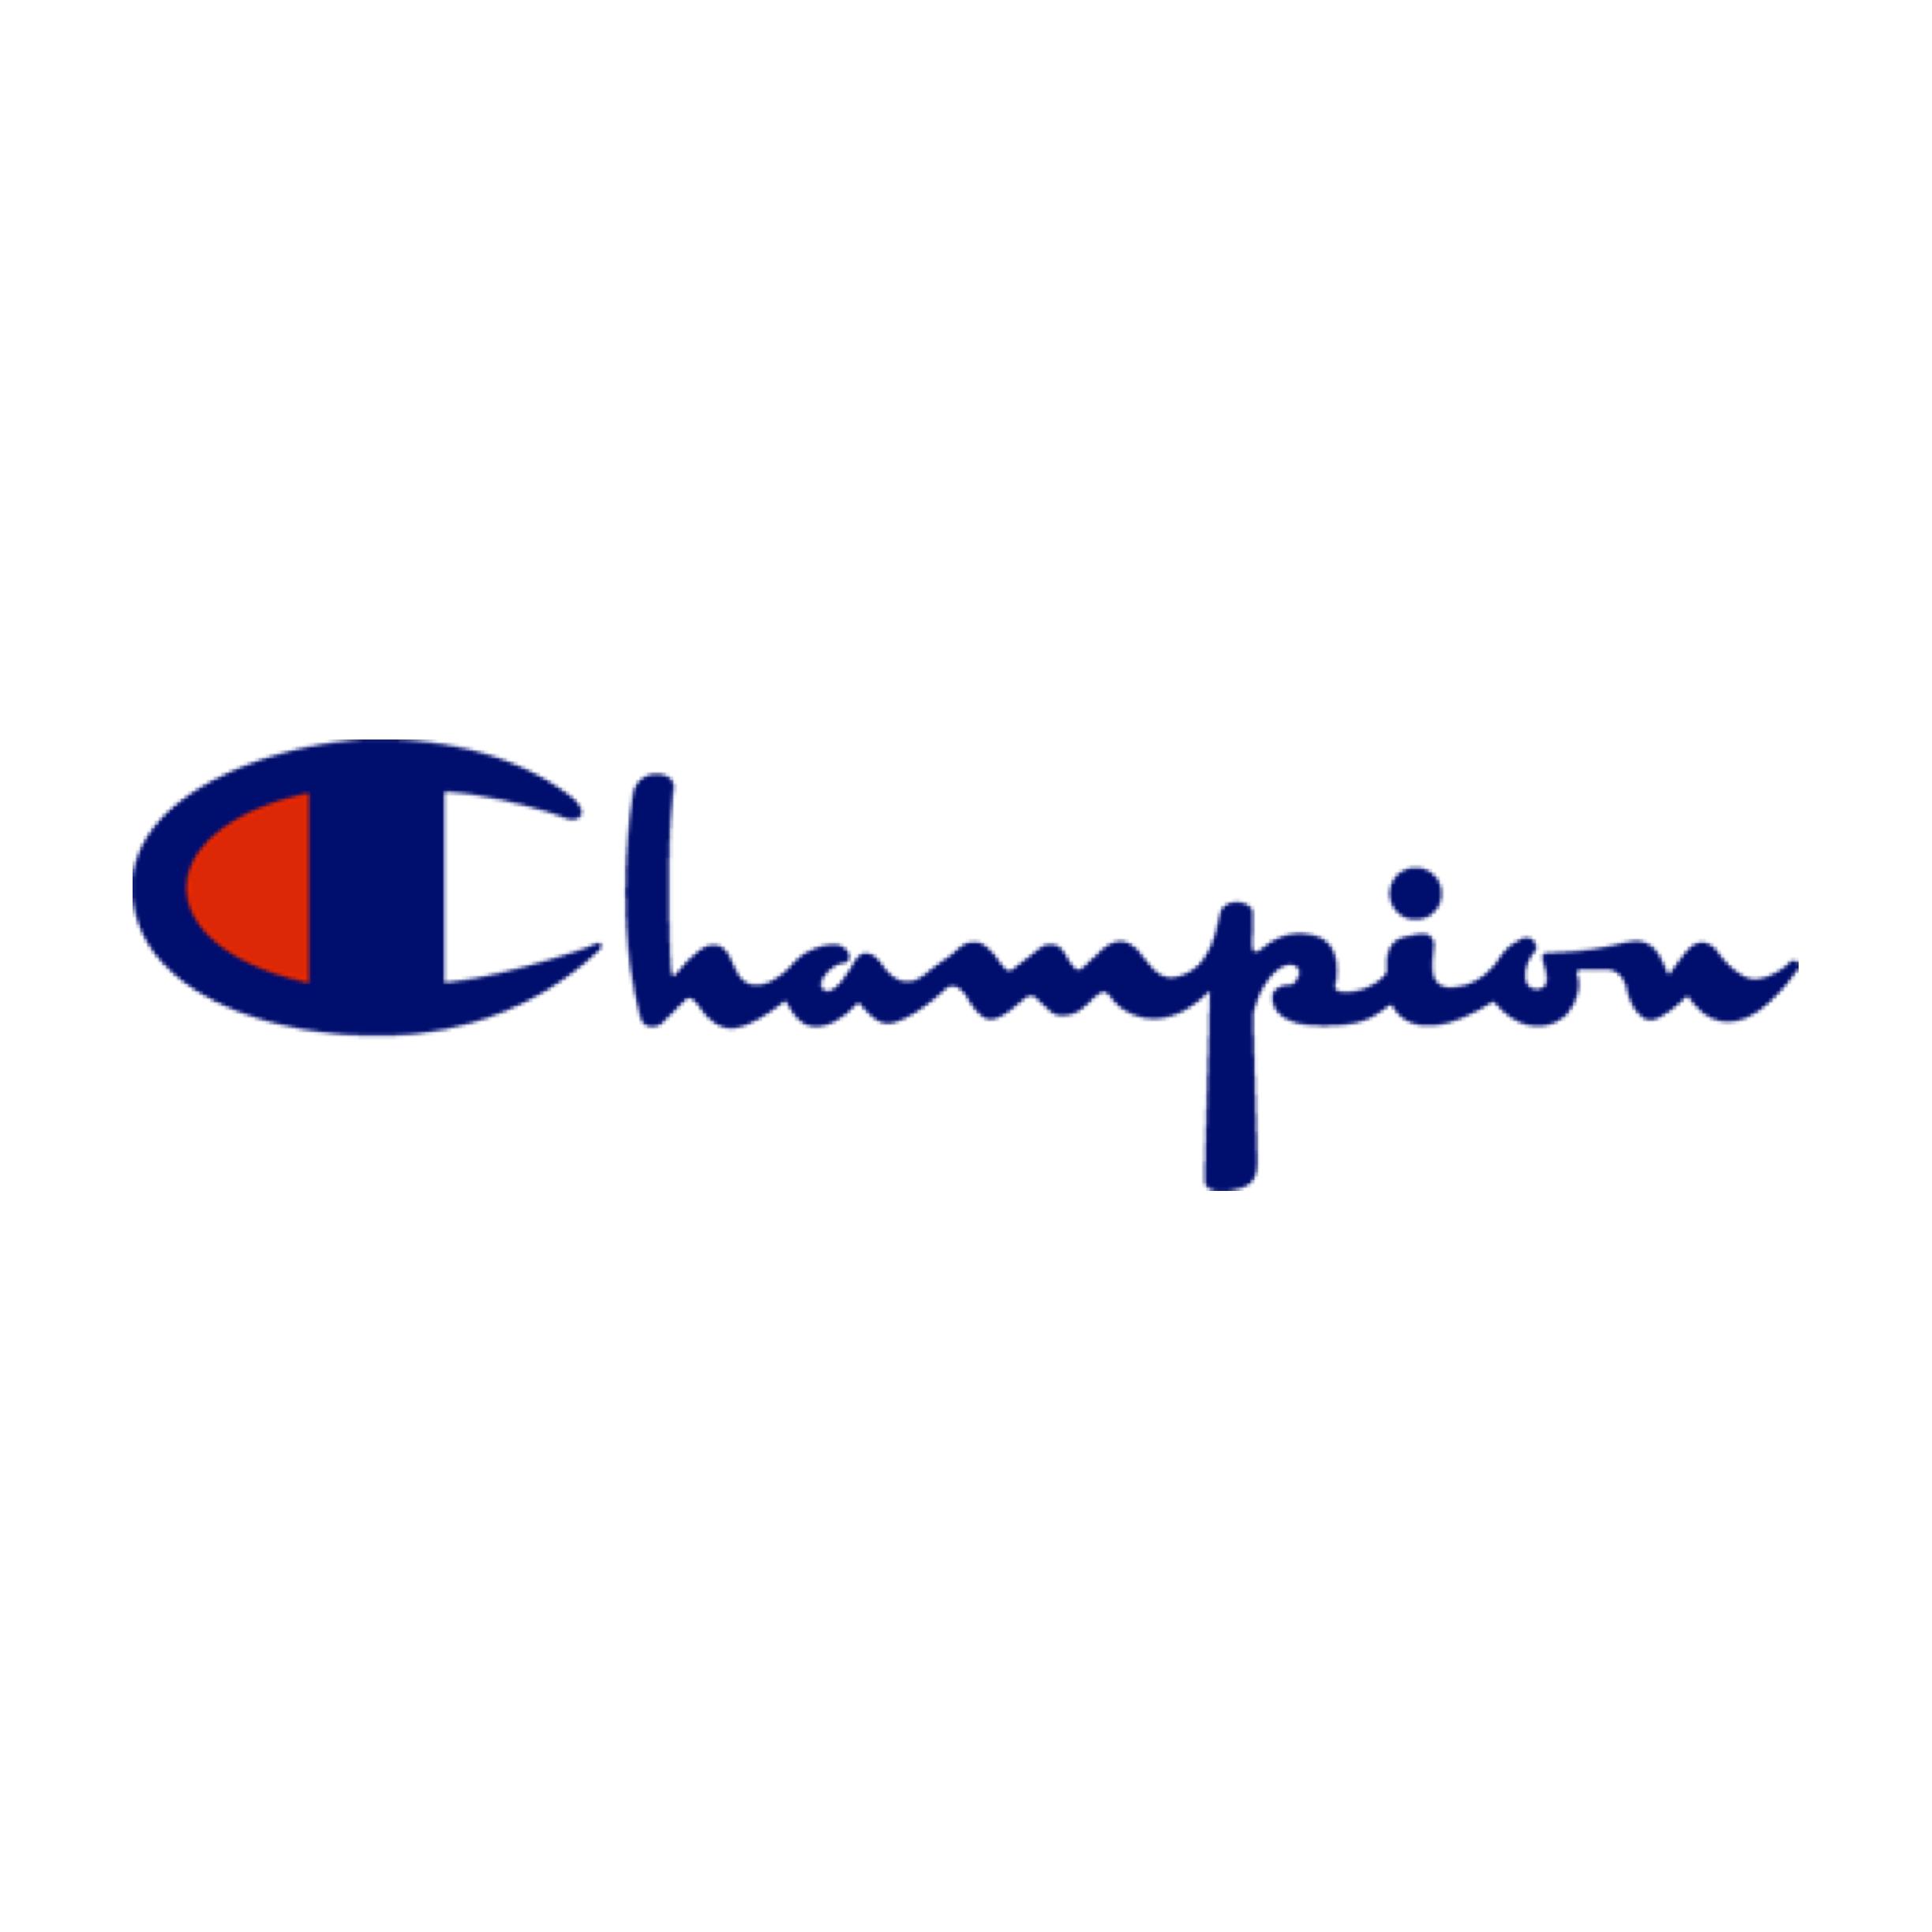 Champion Brand Hd Wallpapers For Pc